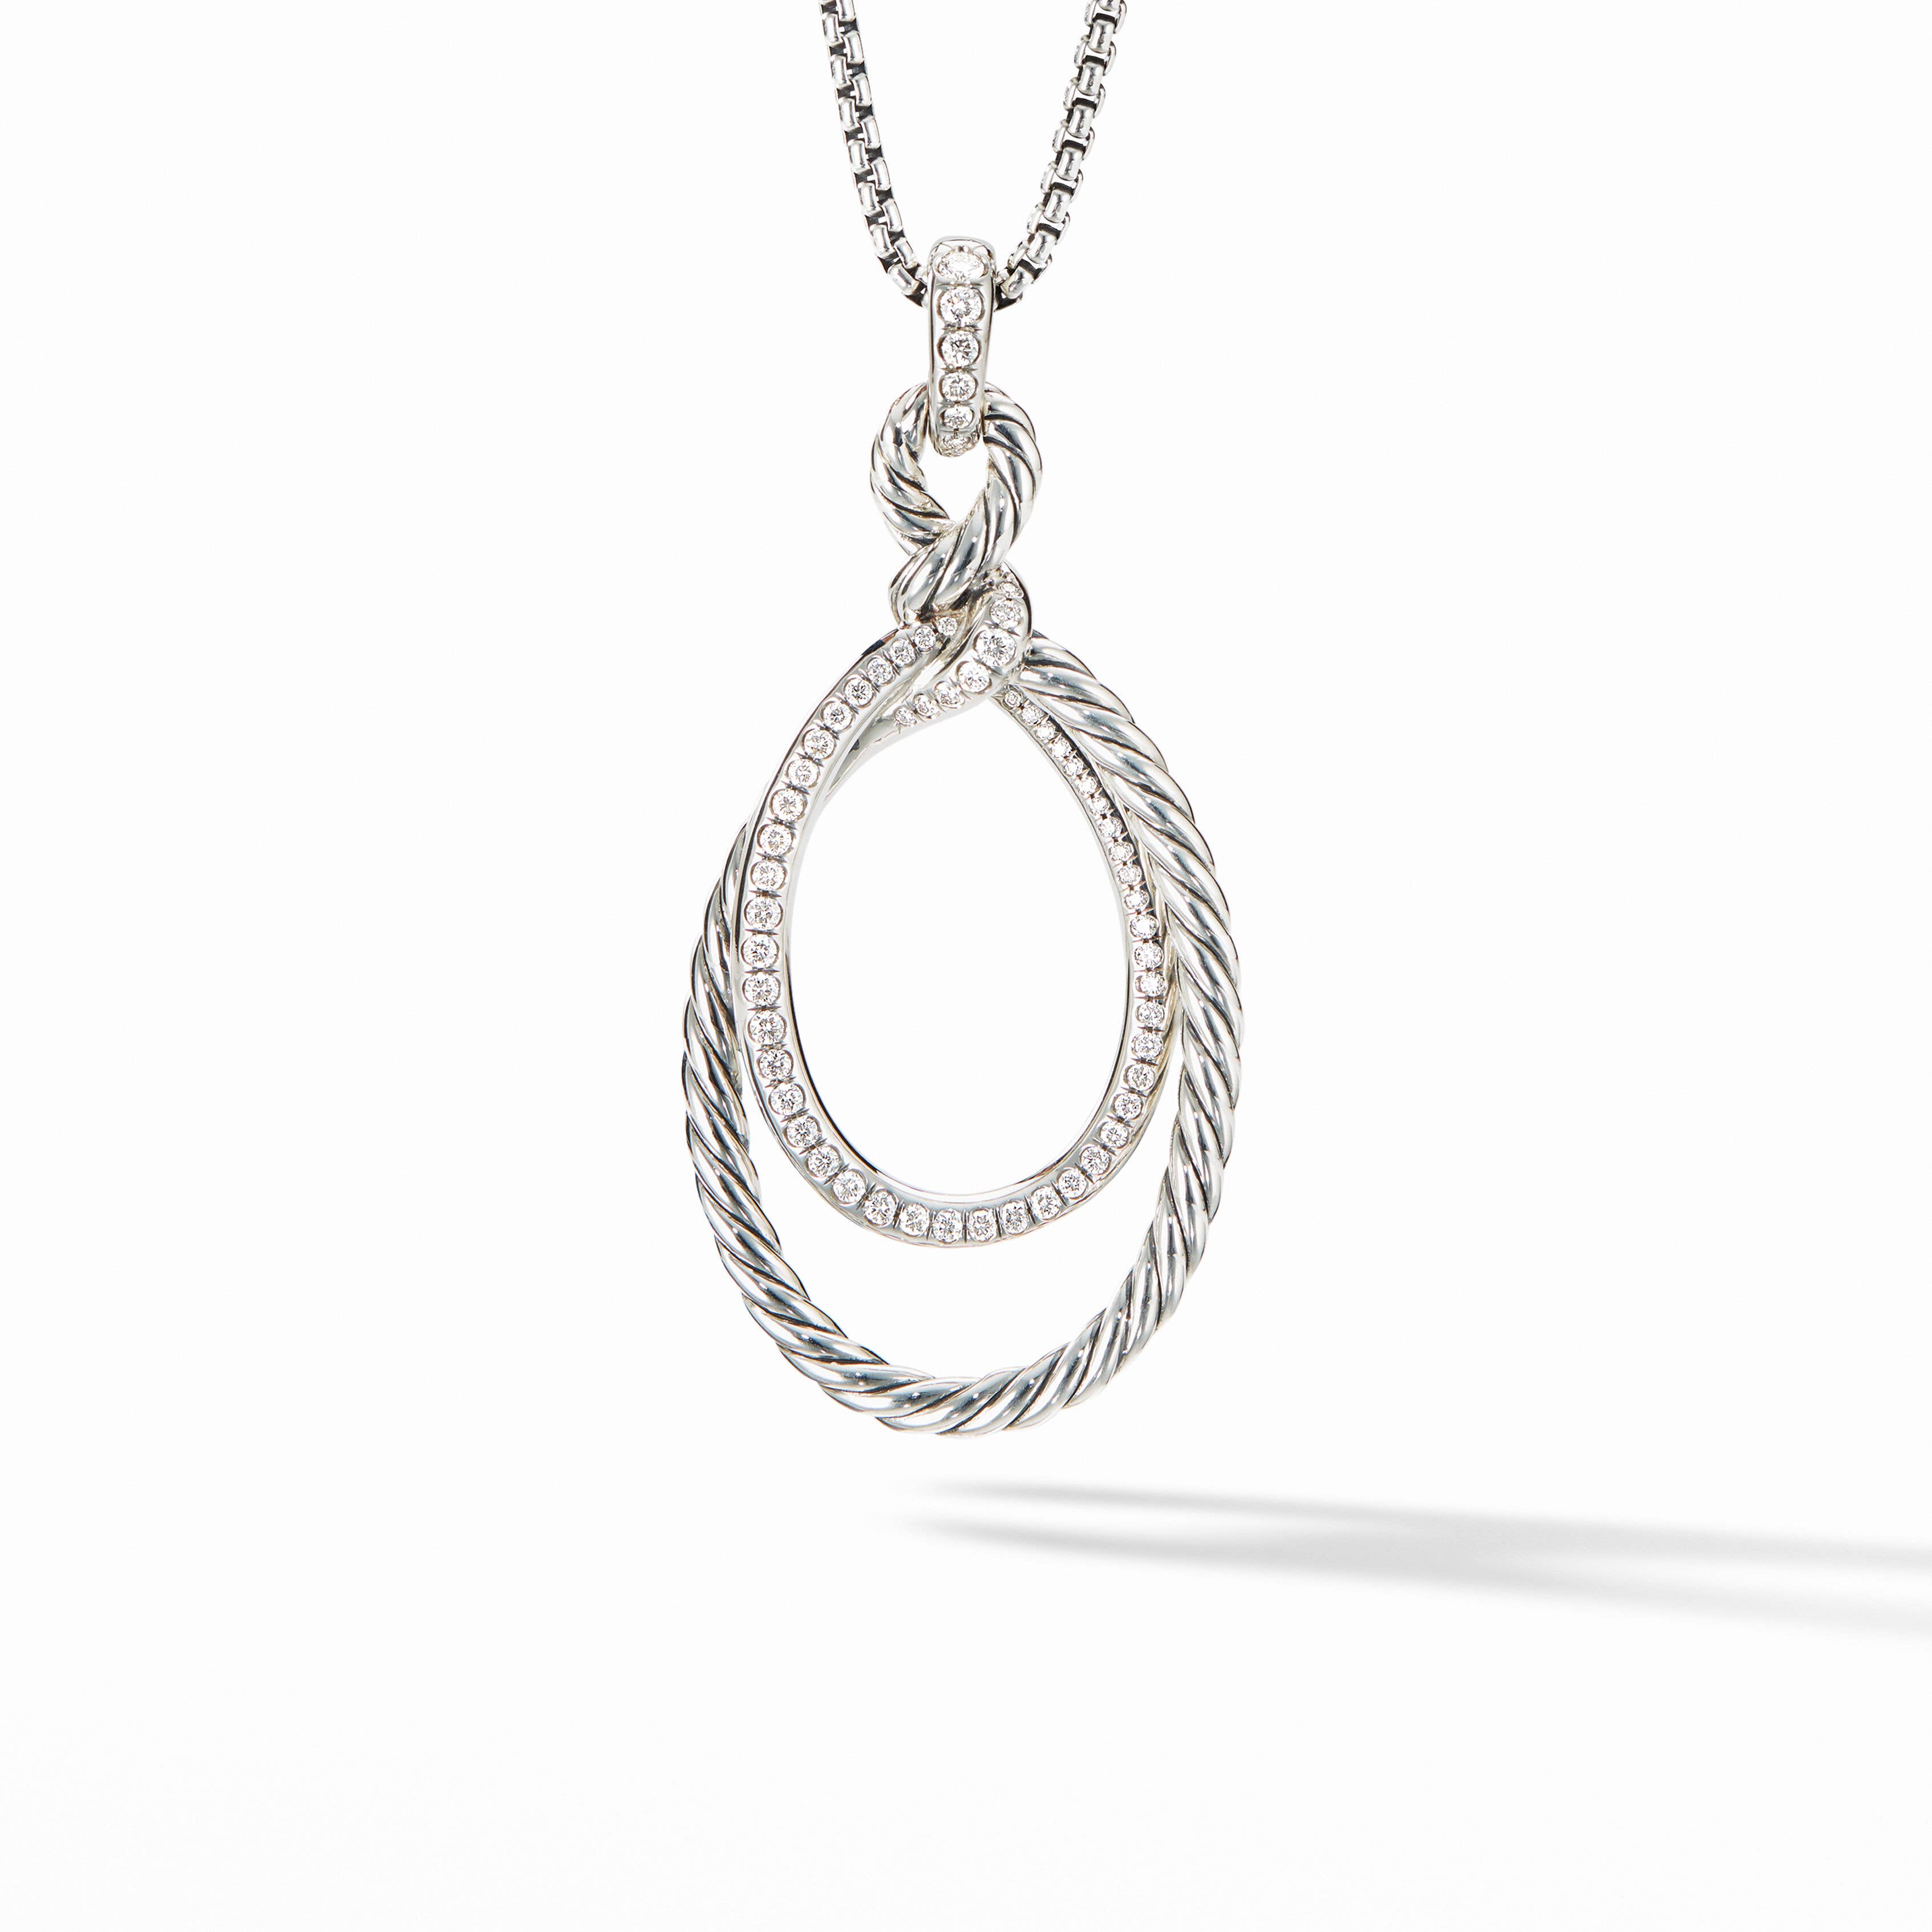 Continuance® Pendant Necklace in Sterling Silver with Pavé Diamonds